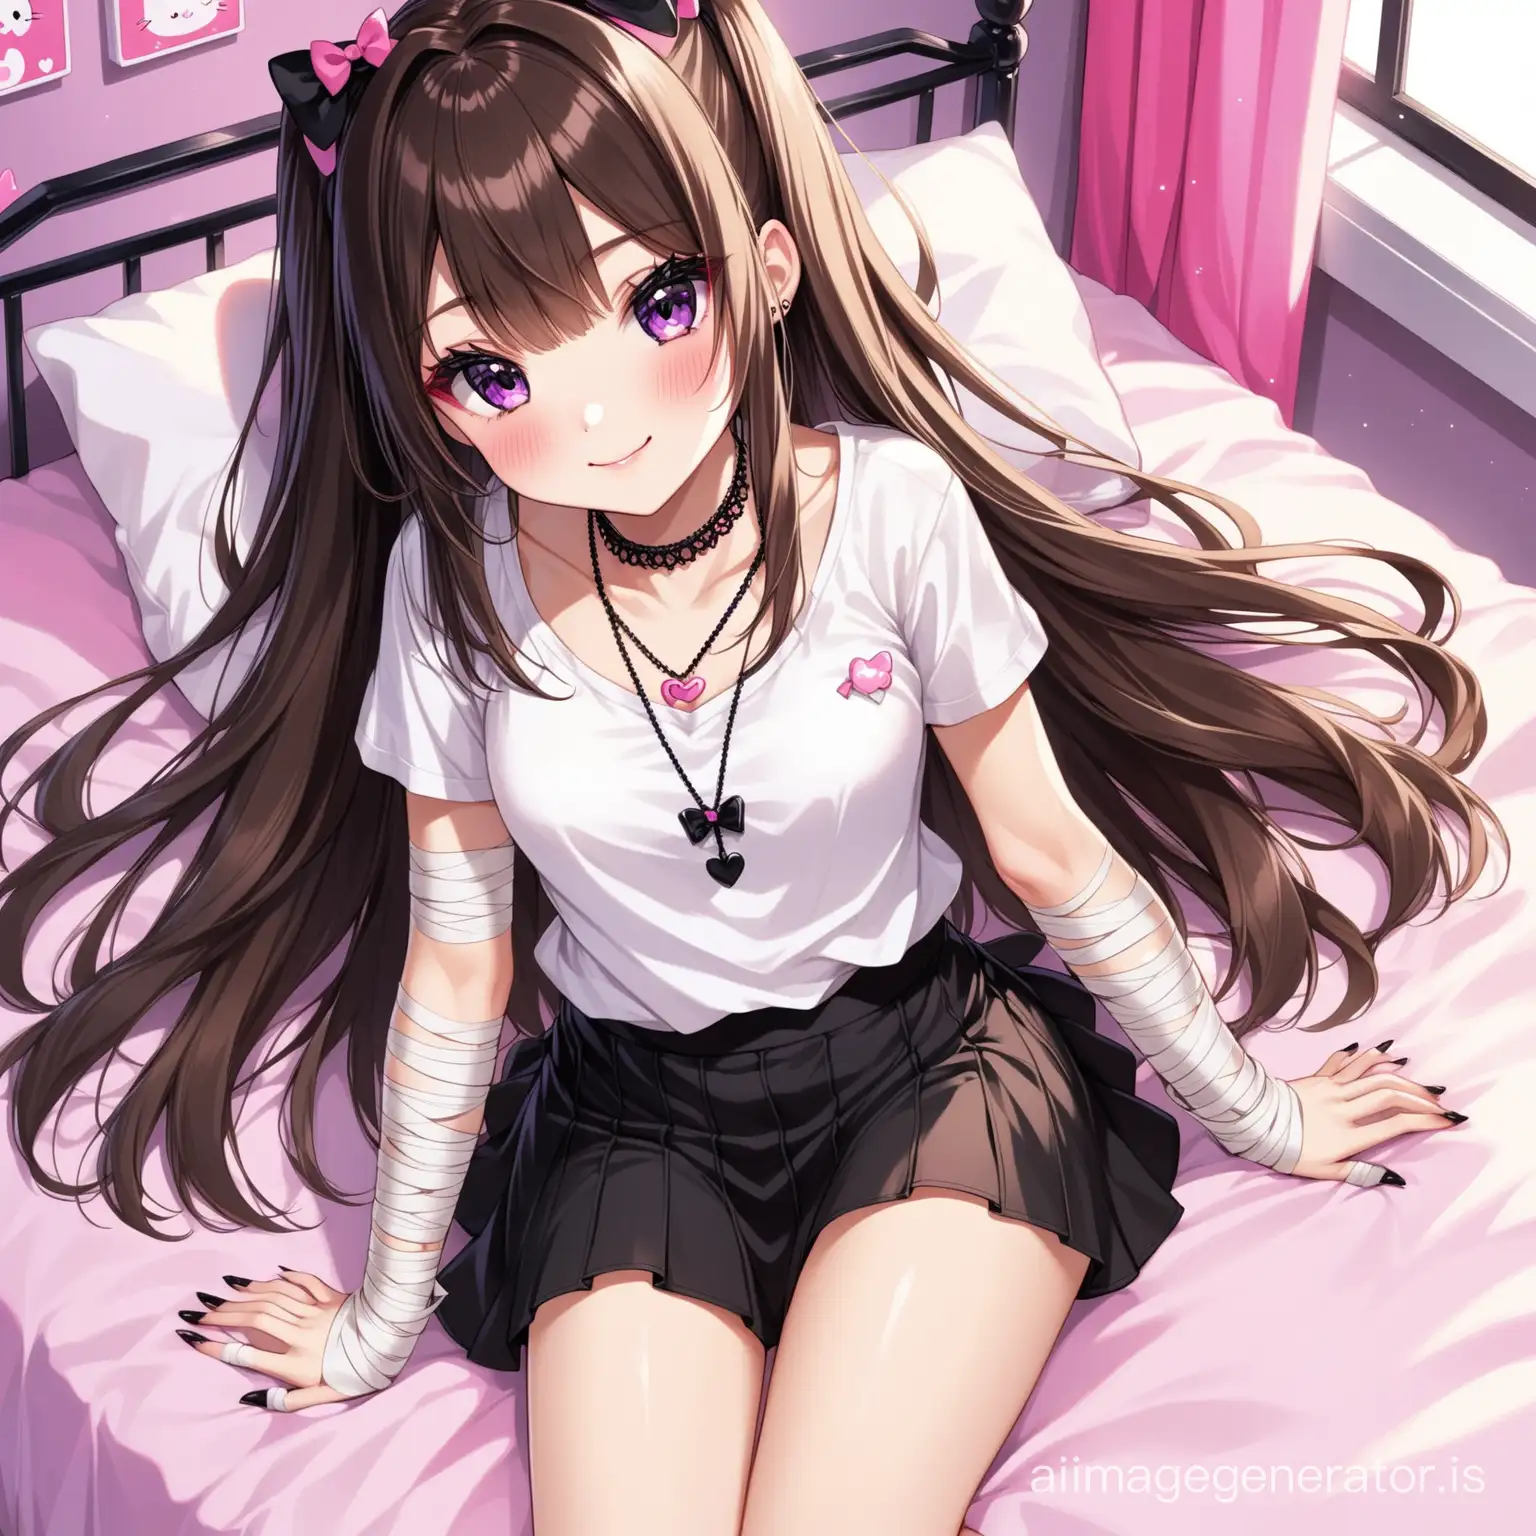 Kawaii-Core-Girl-with-Bandages-and-Bow-Accents-Relaxing-on-Bed